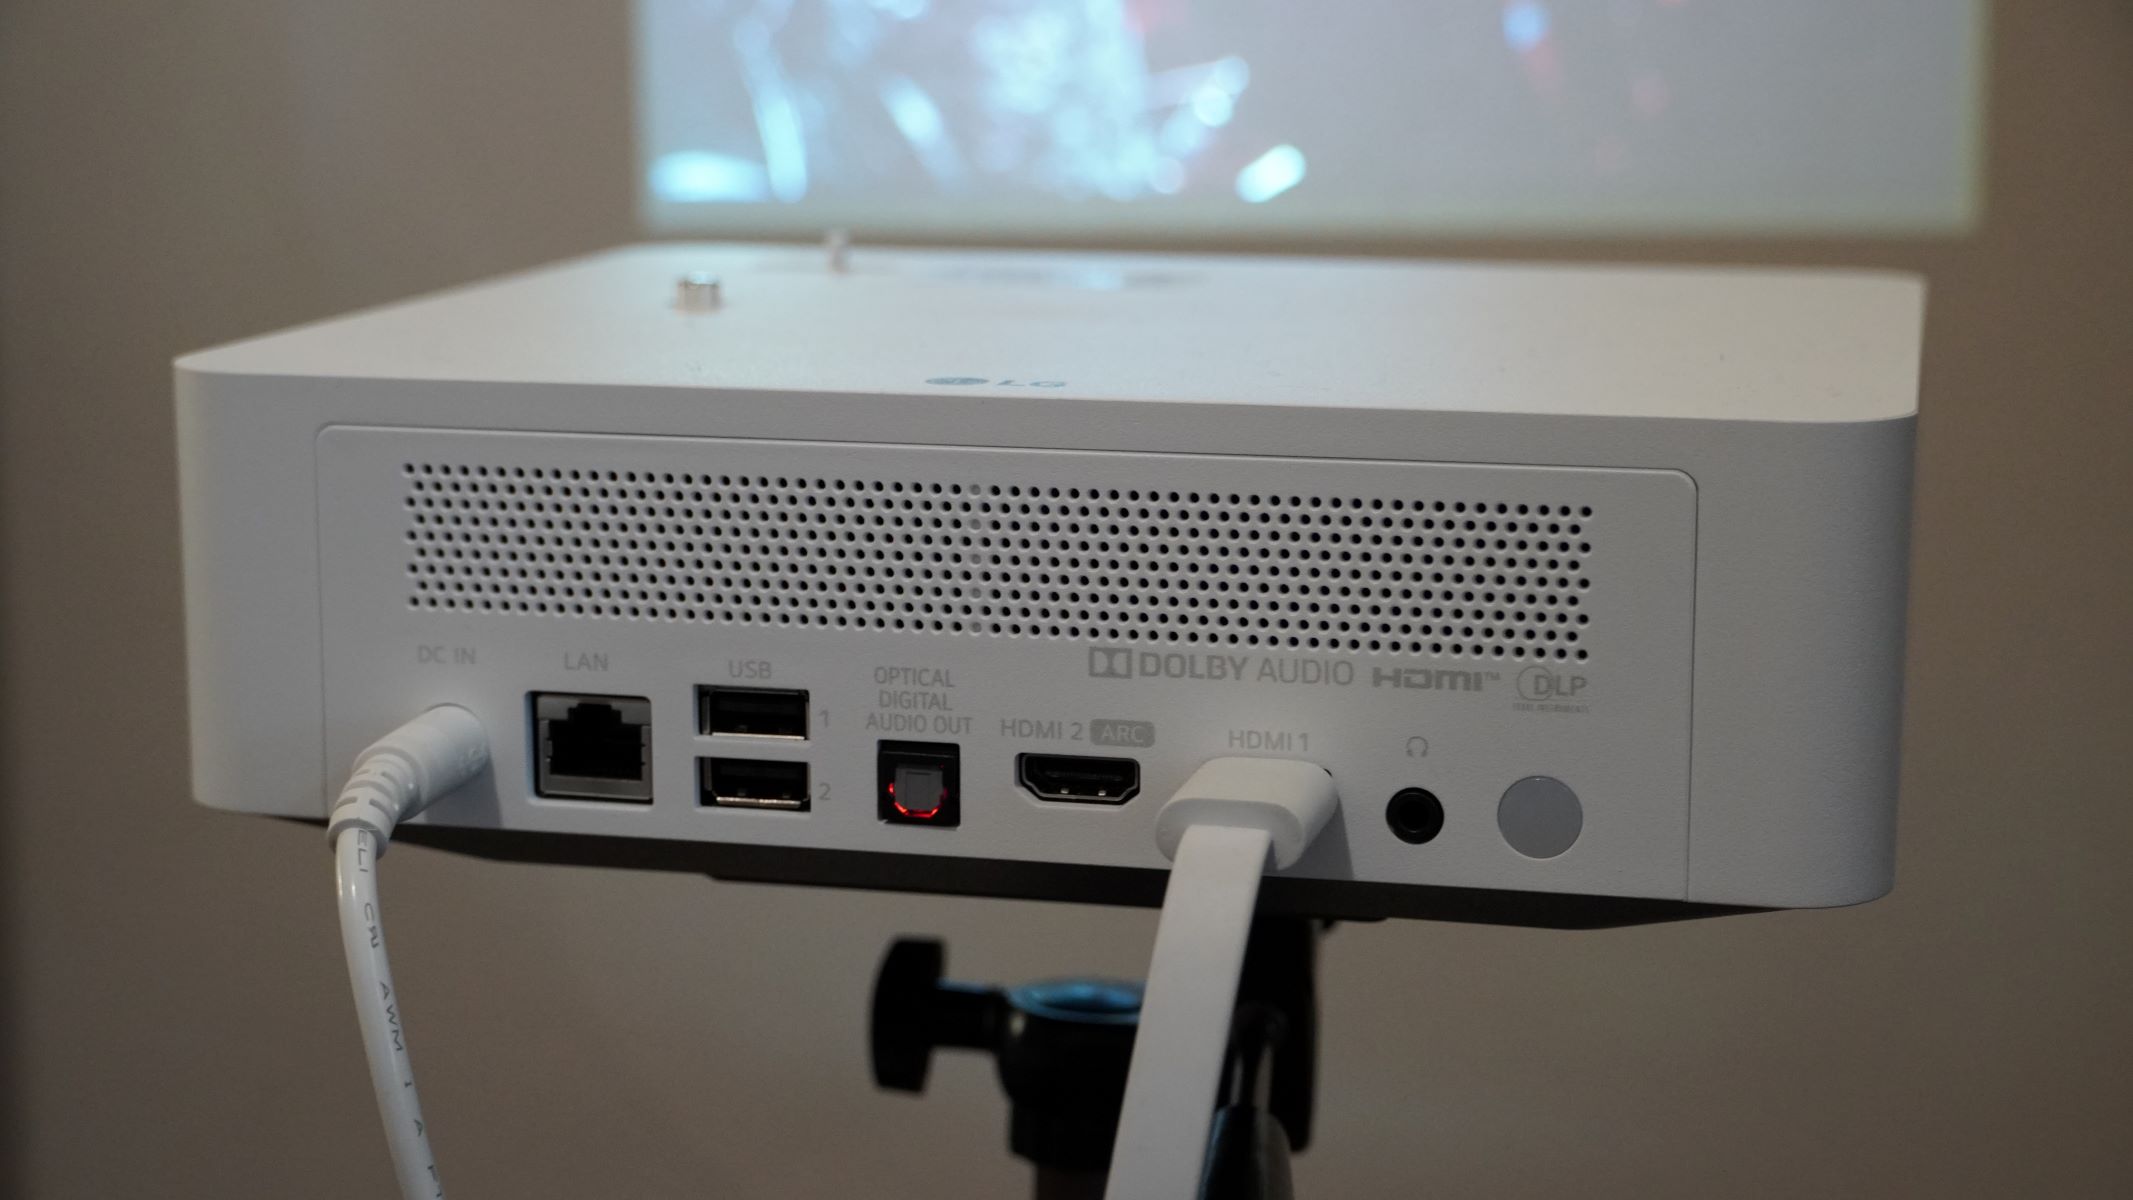 connecting-iphone-to-lg-projector-step-by-step-instructions